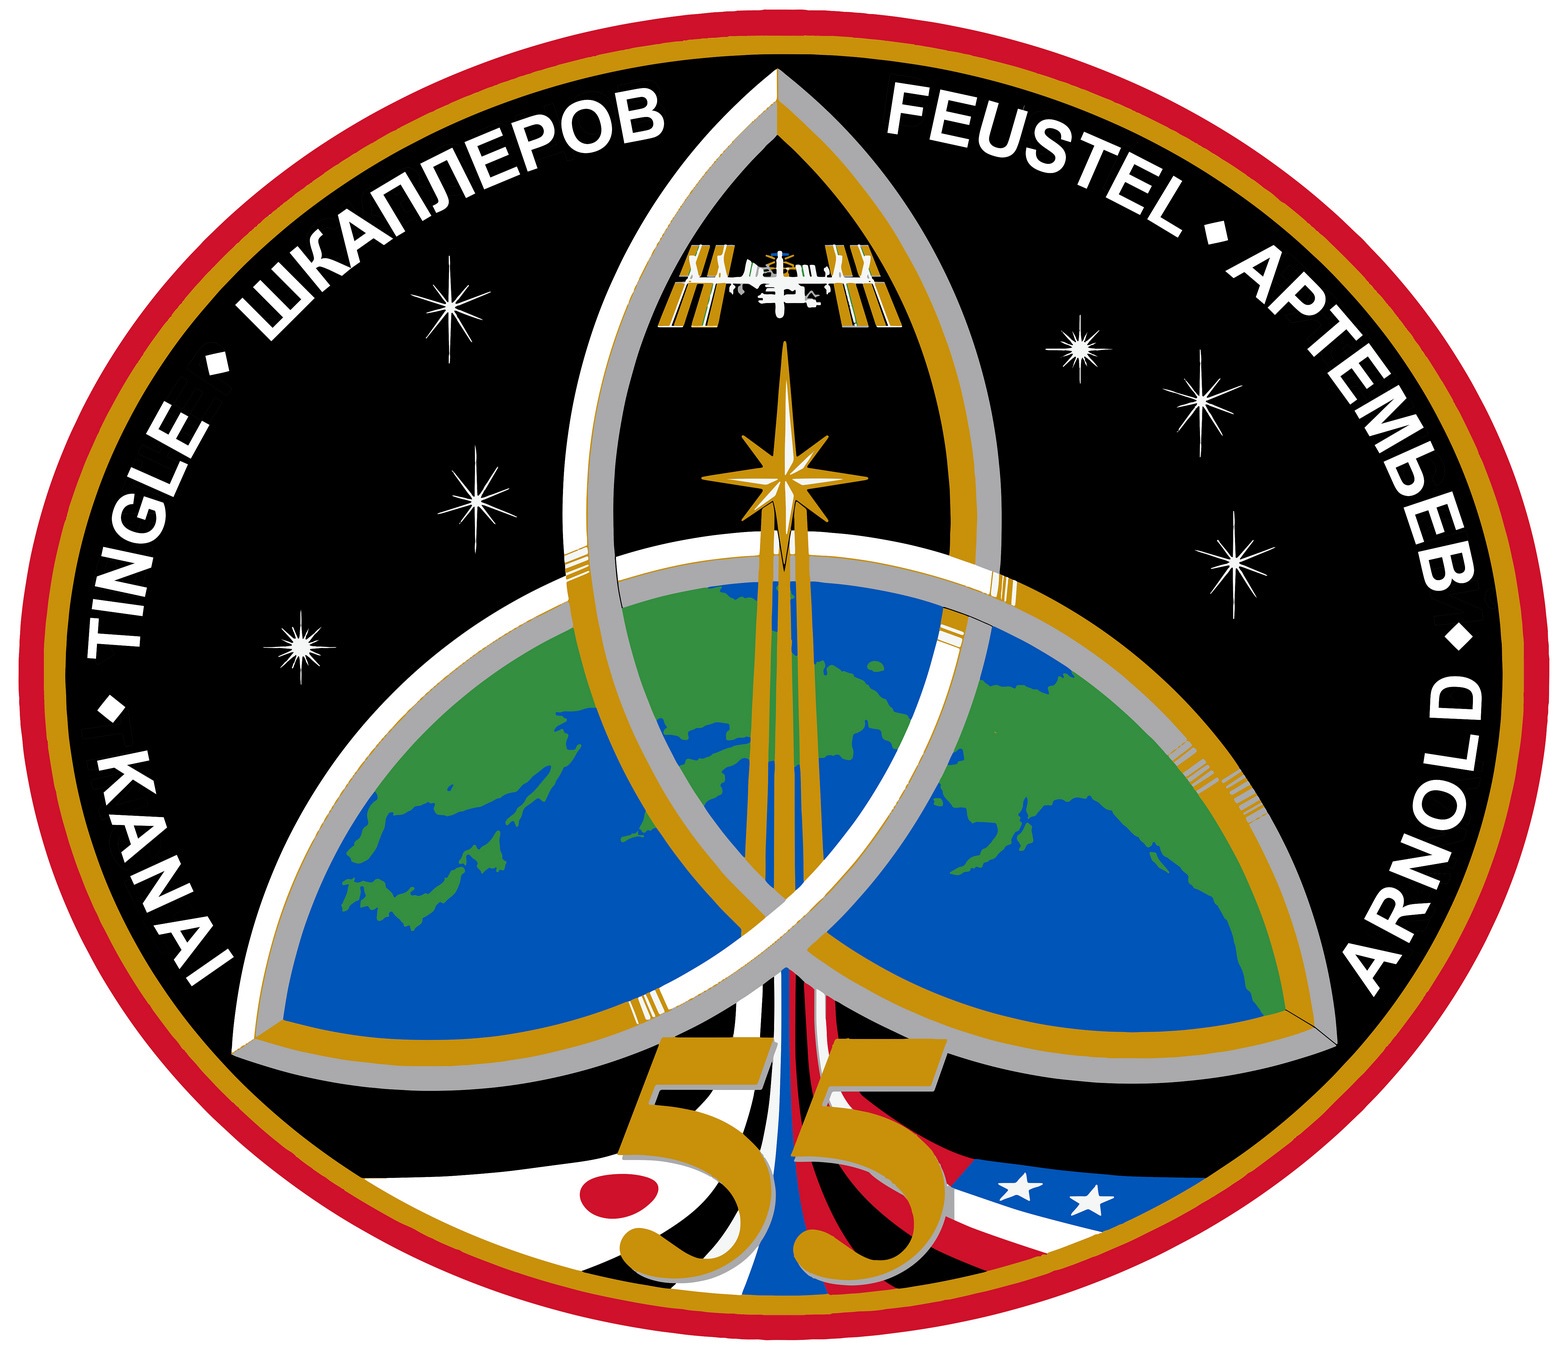 Expedition 55